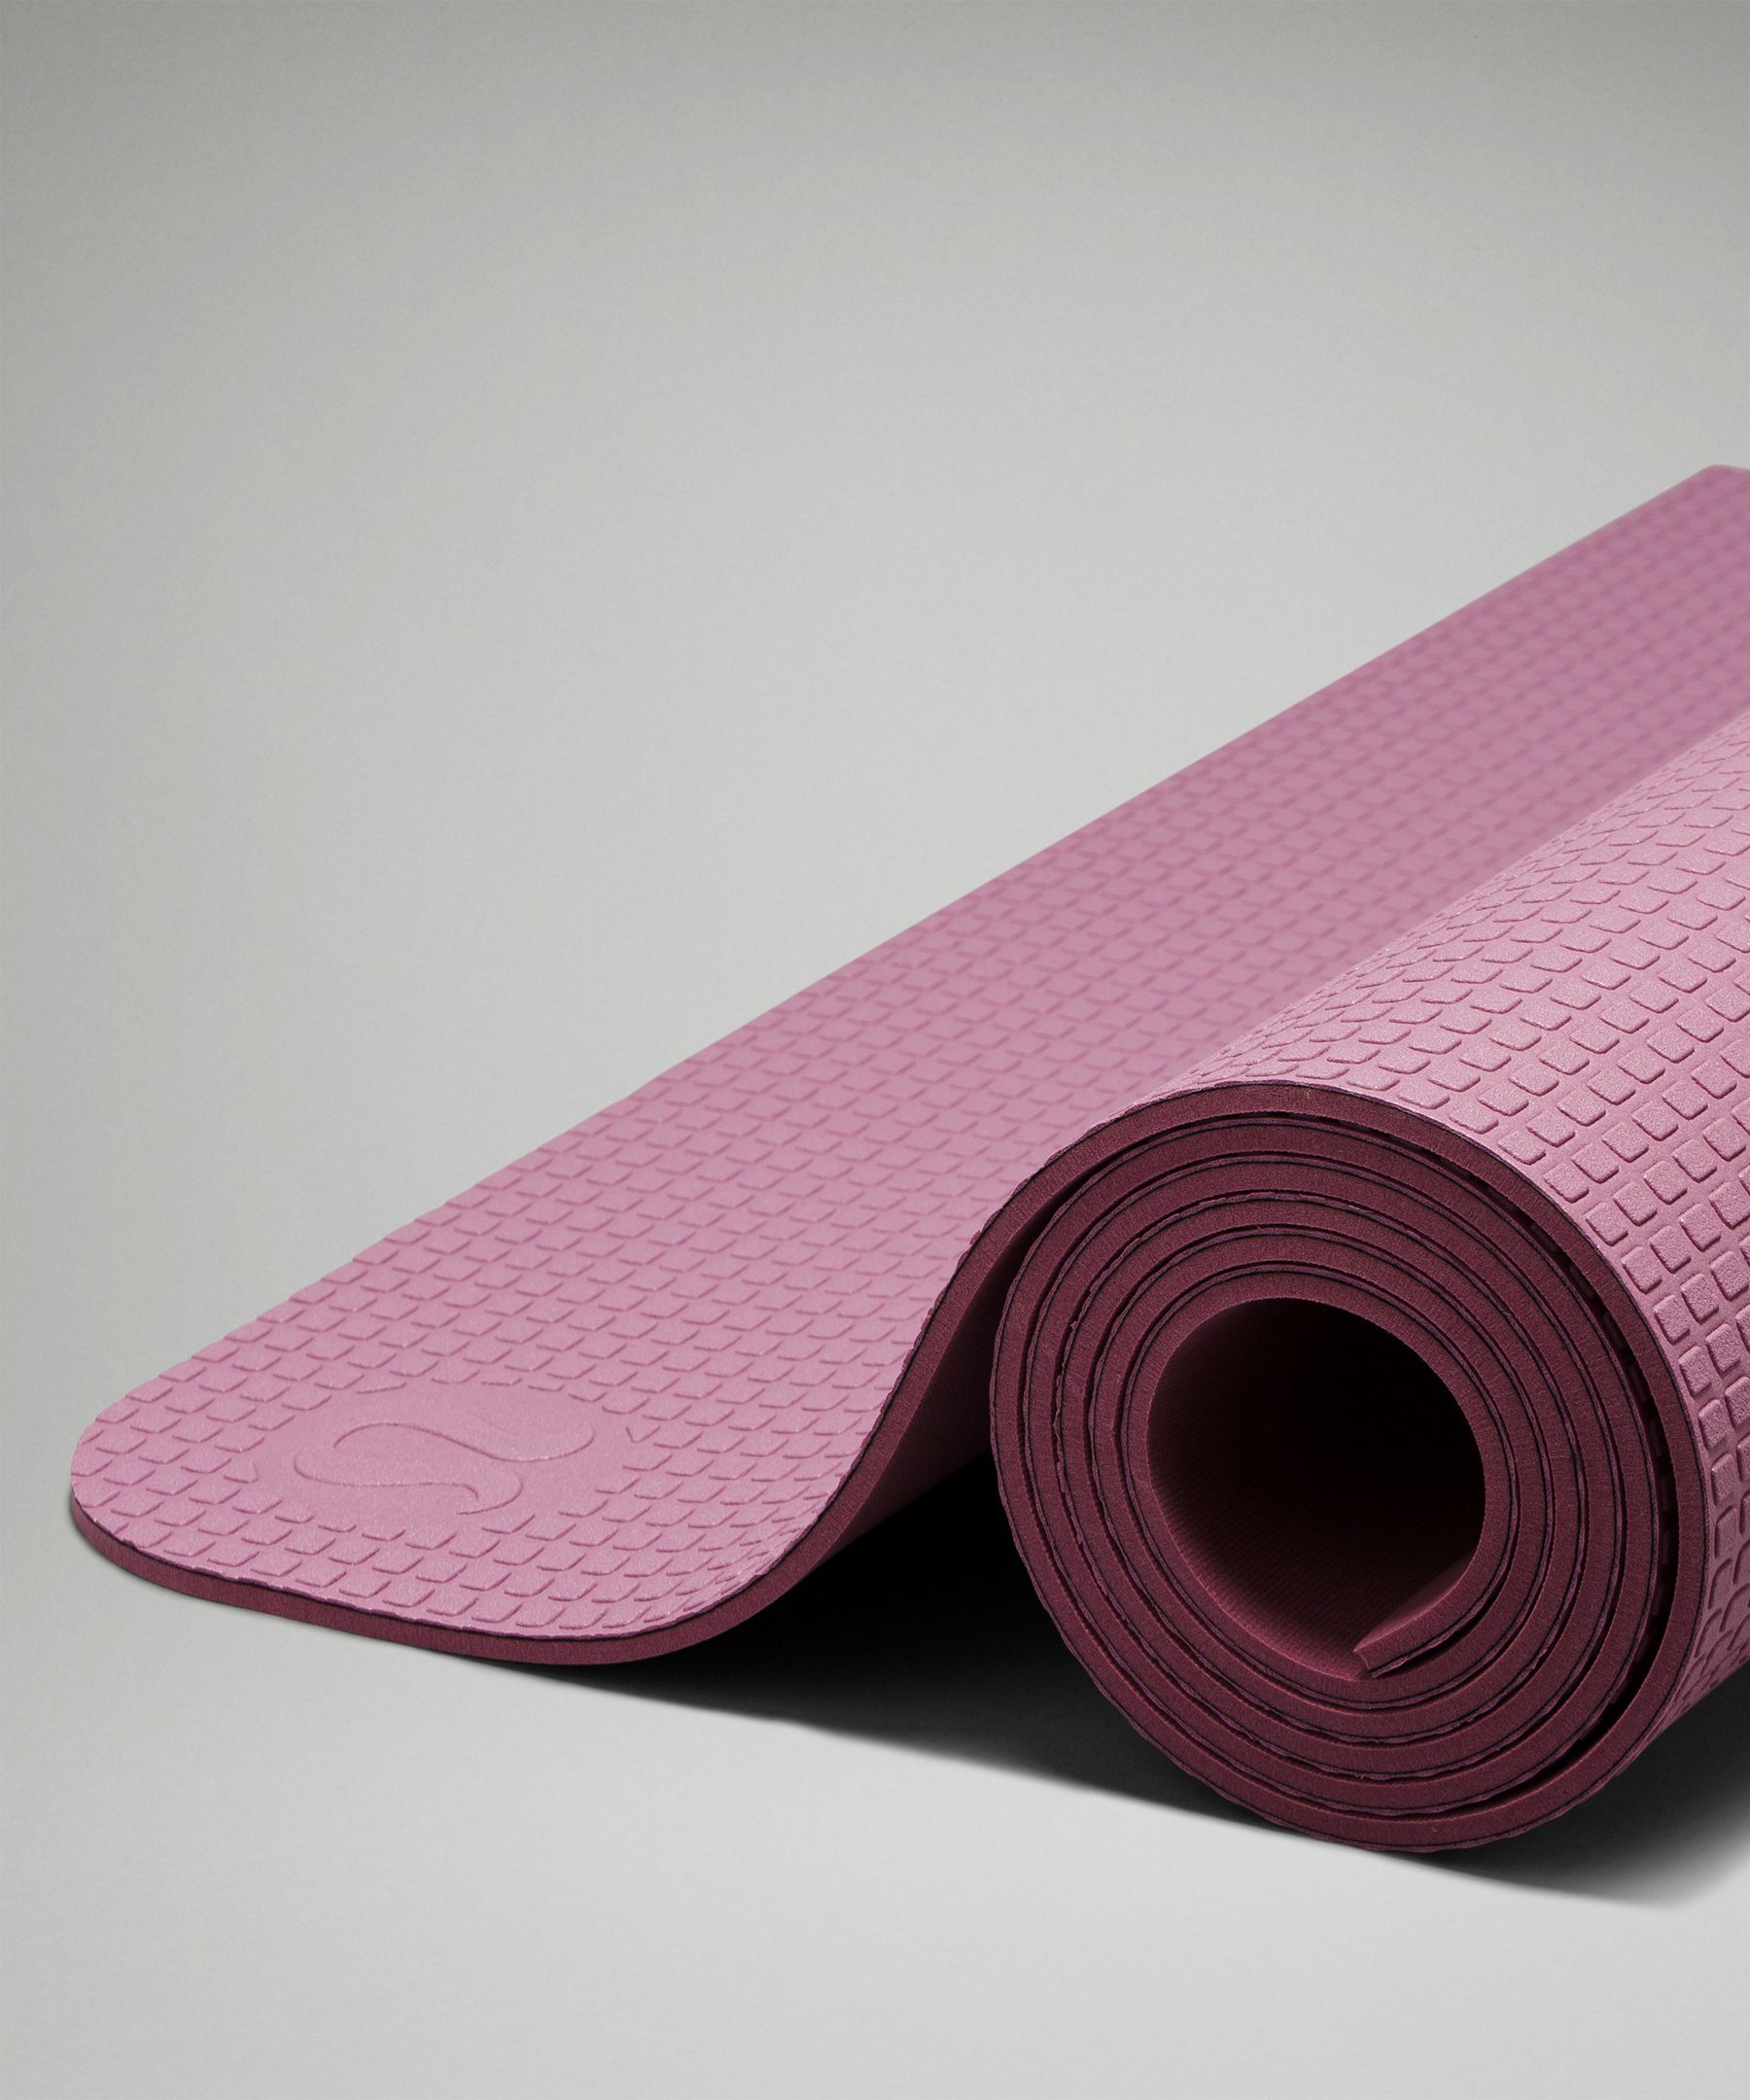 Find more Lululemon Travel Yoga Mat for sale at up to 90% off